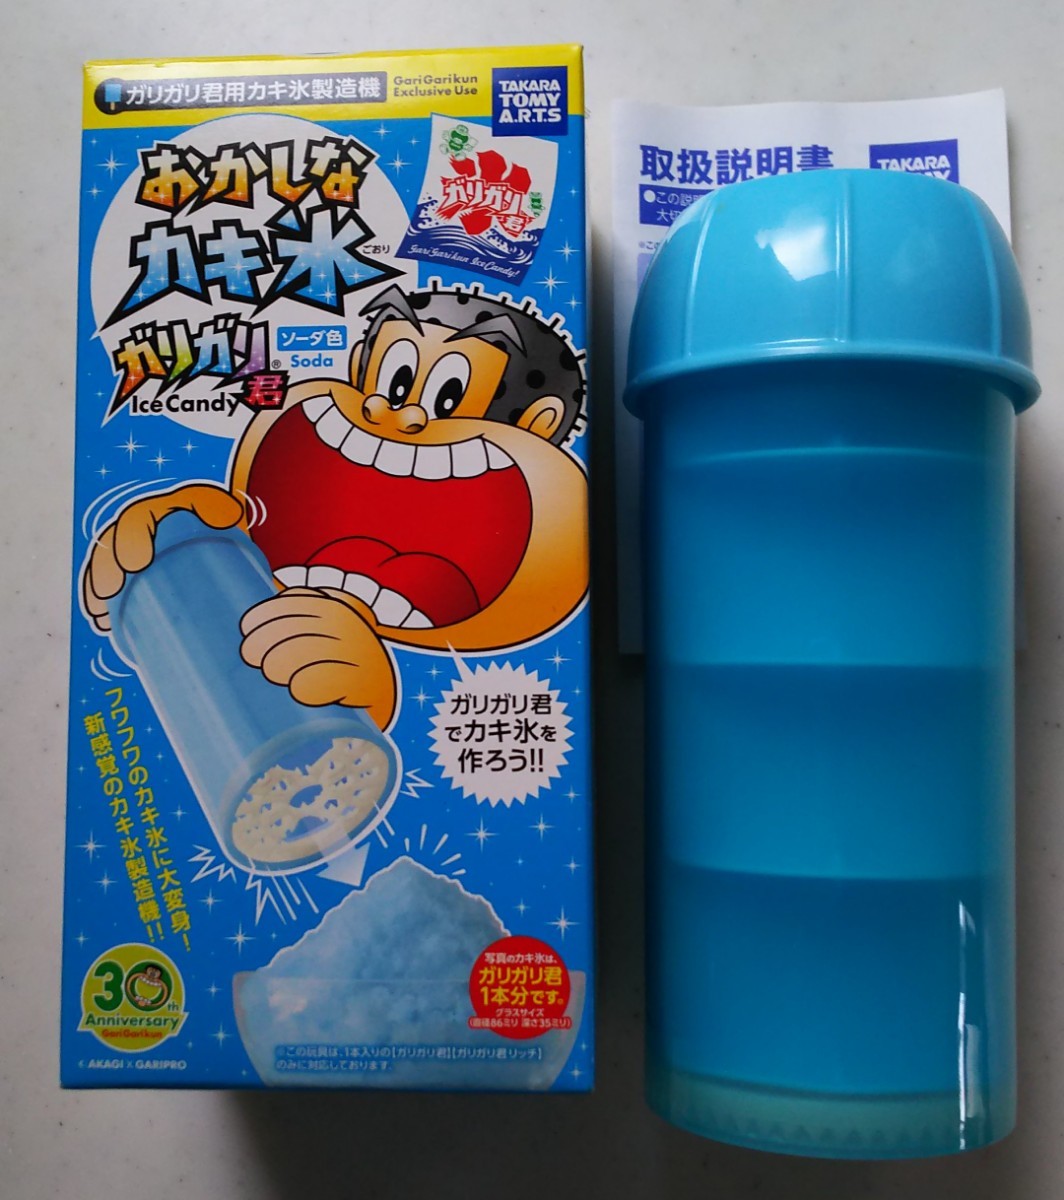  new goods unused .... oyster ice gully gully . soda color Takara Tommy a-tsu snow cone kakigori ice candy - for postage letter pack post service plus 520 jpy 